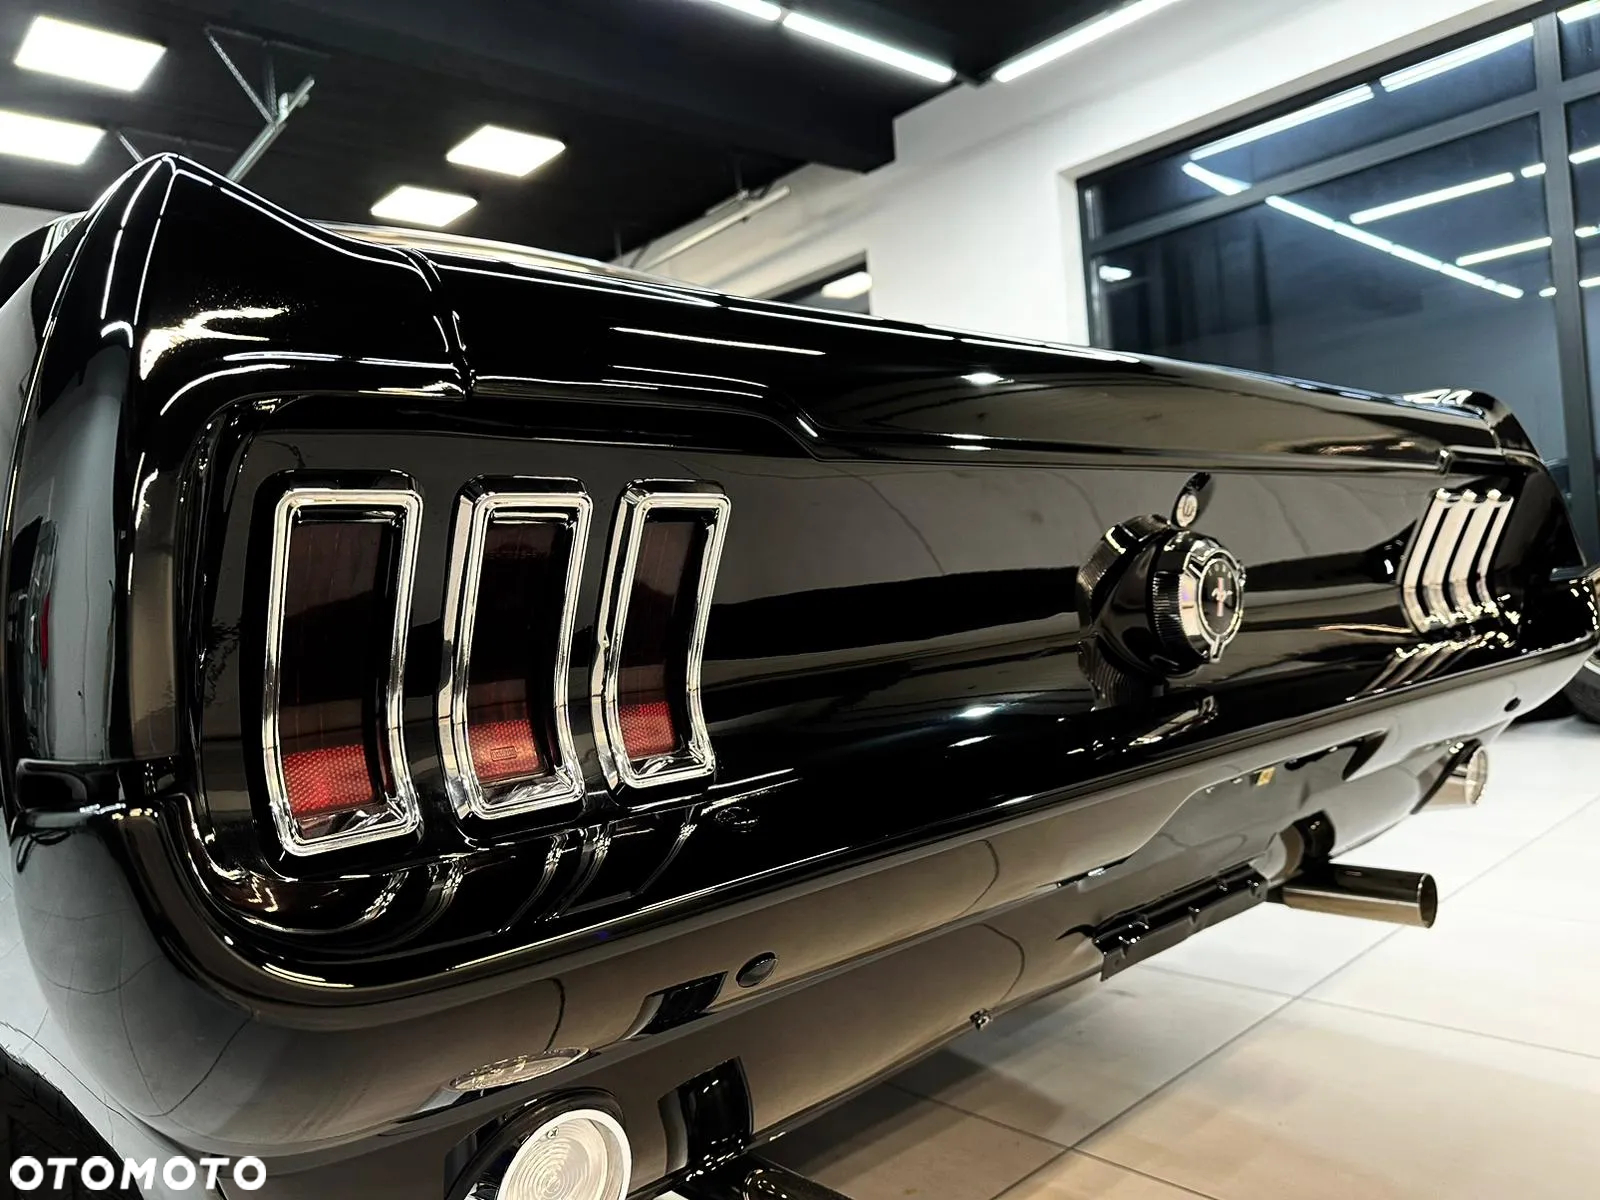 Ford Mustang - 4